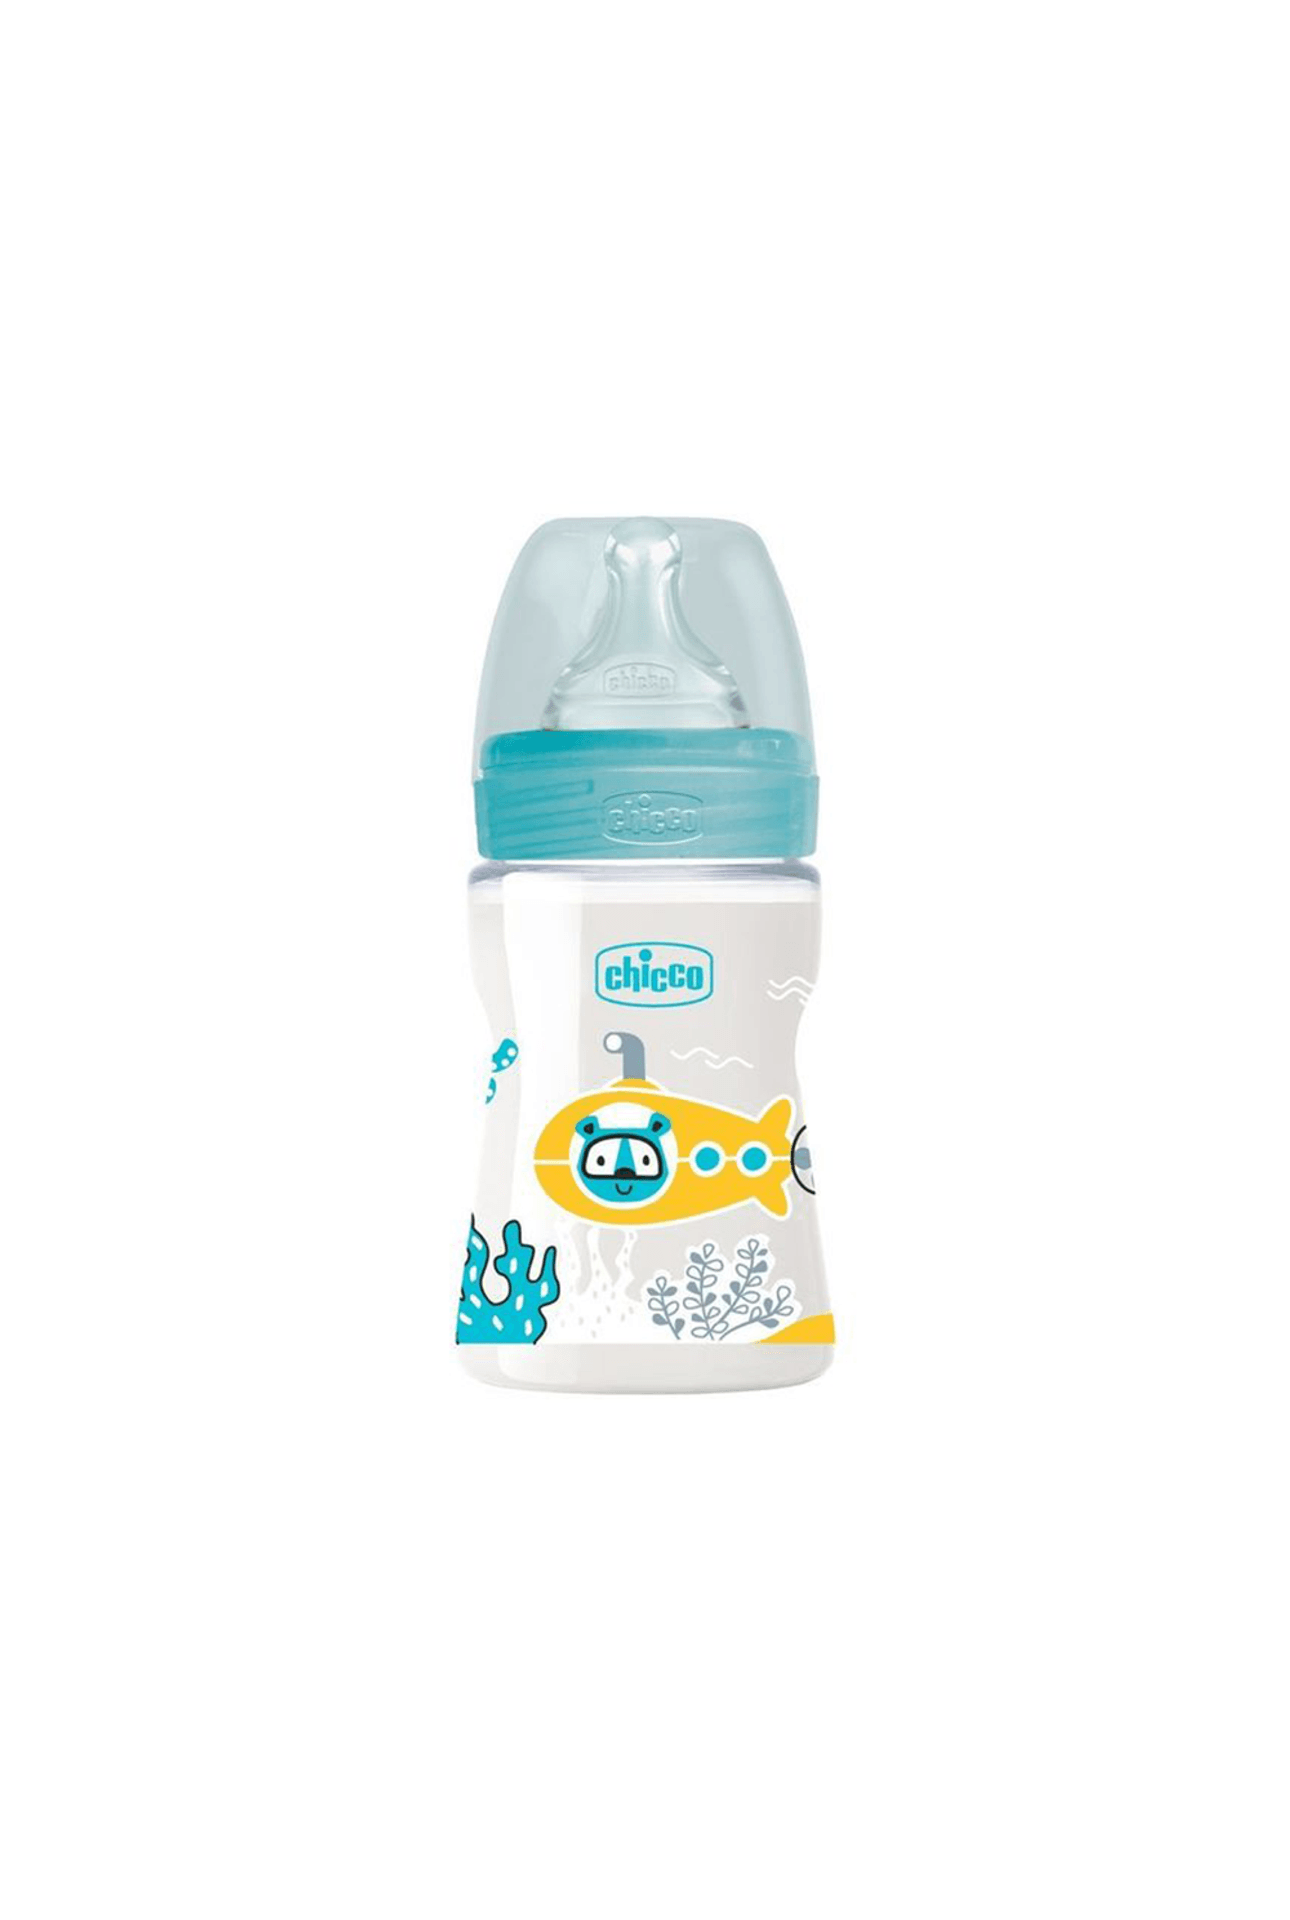 Chicco-Mamadera-Well-Being-x-150-ml-8058664146413_img1